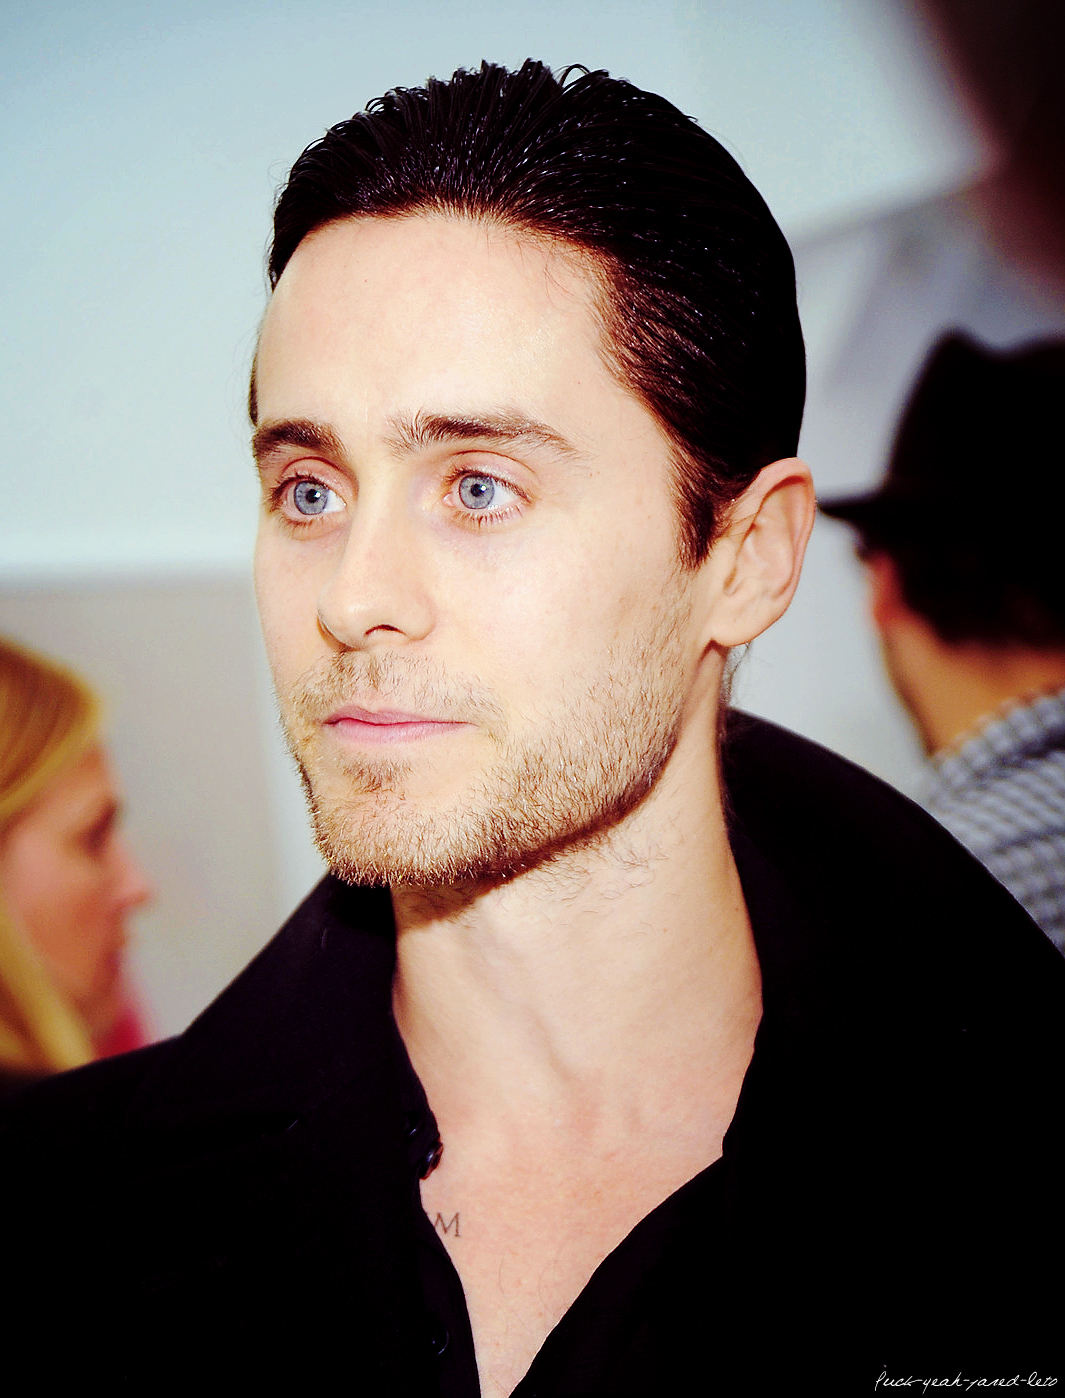 music, people, artists, men, 30 seconds to mars, jared leto